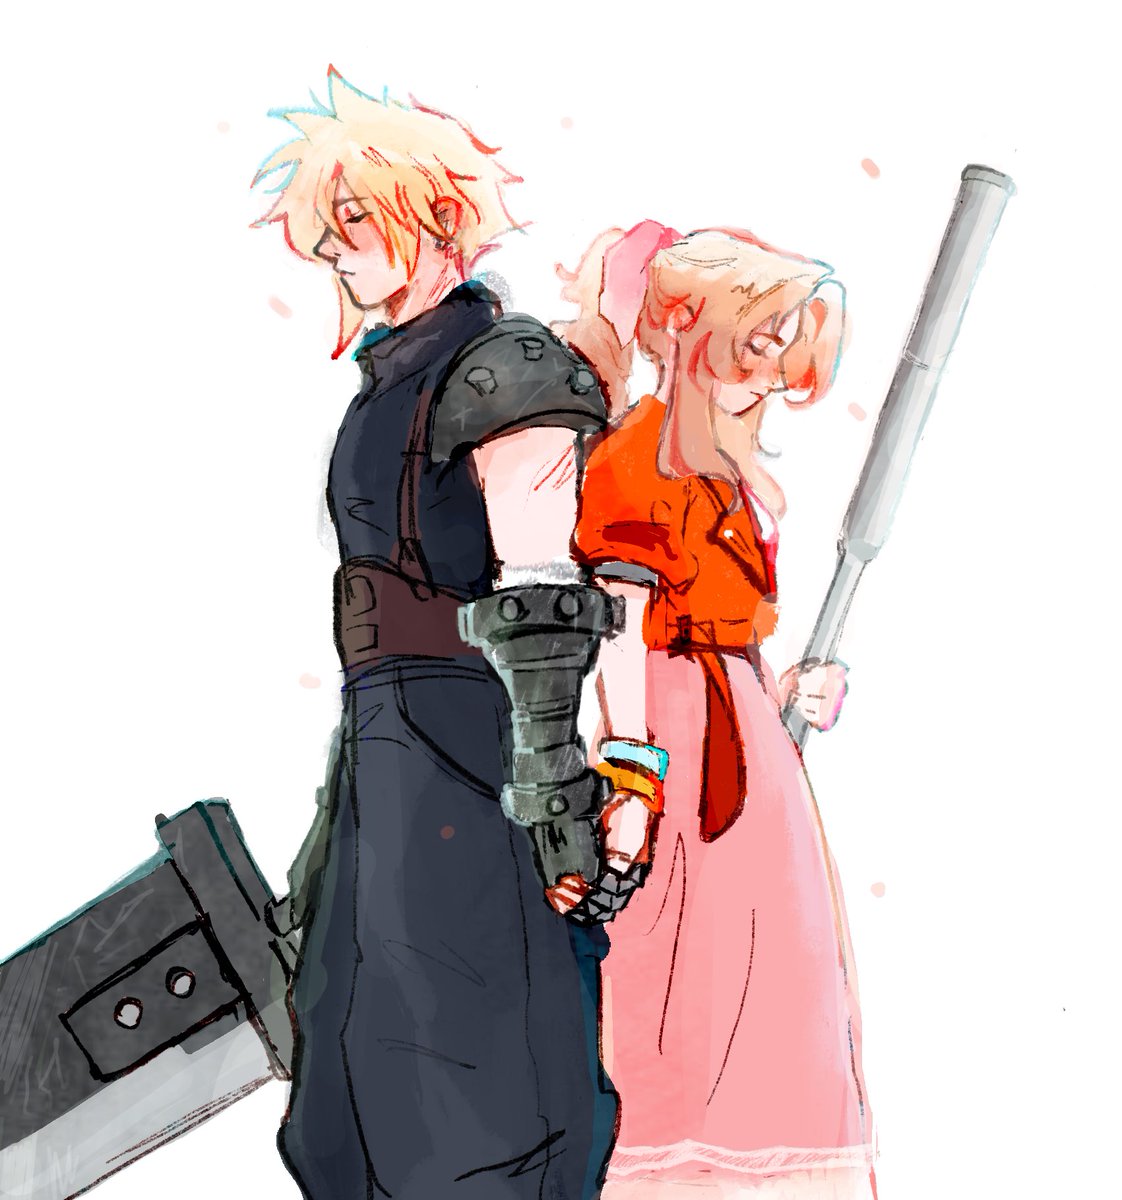 Artblock is not gonna stop me from drawing them 😤 #Clerith #FF7